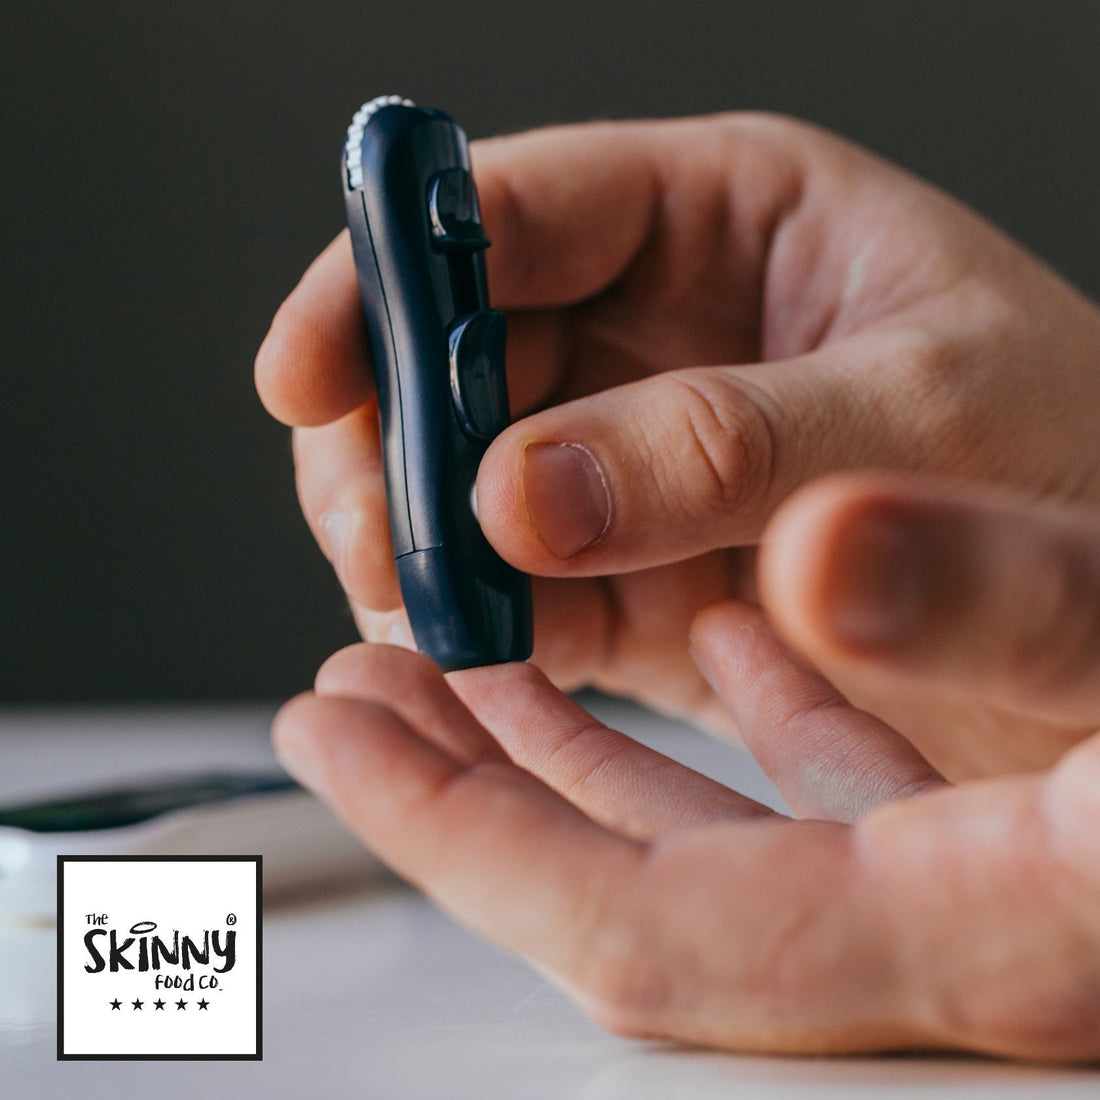 What Are The Main Causes Of Diabetes? - theskinnyfoodco